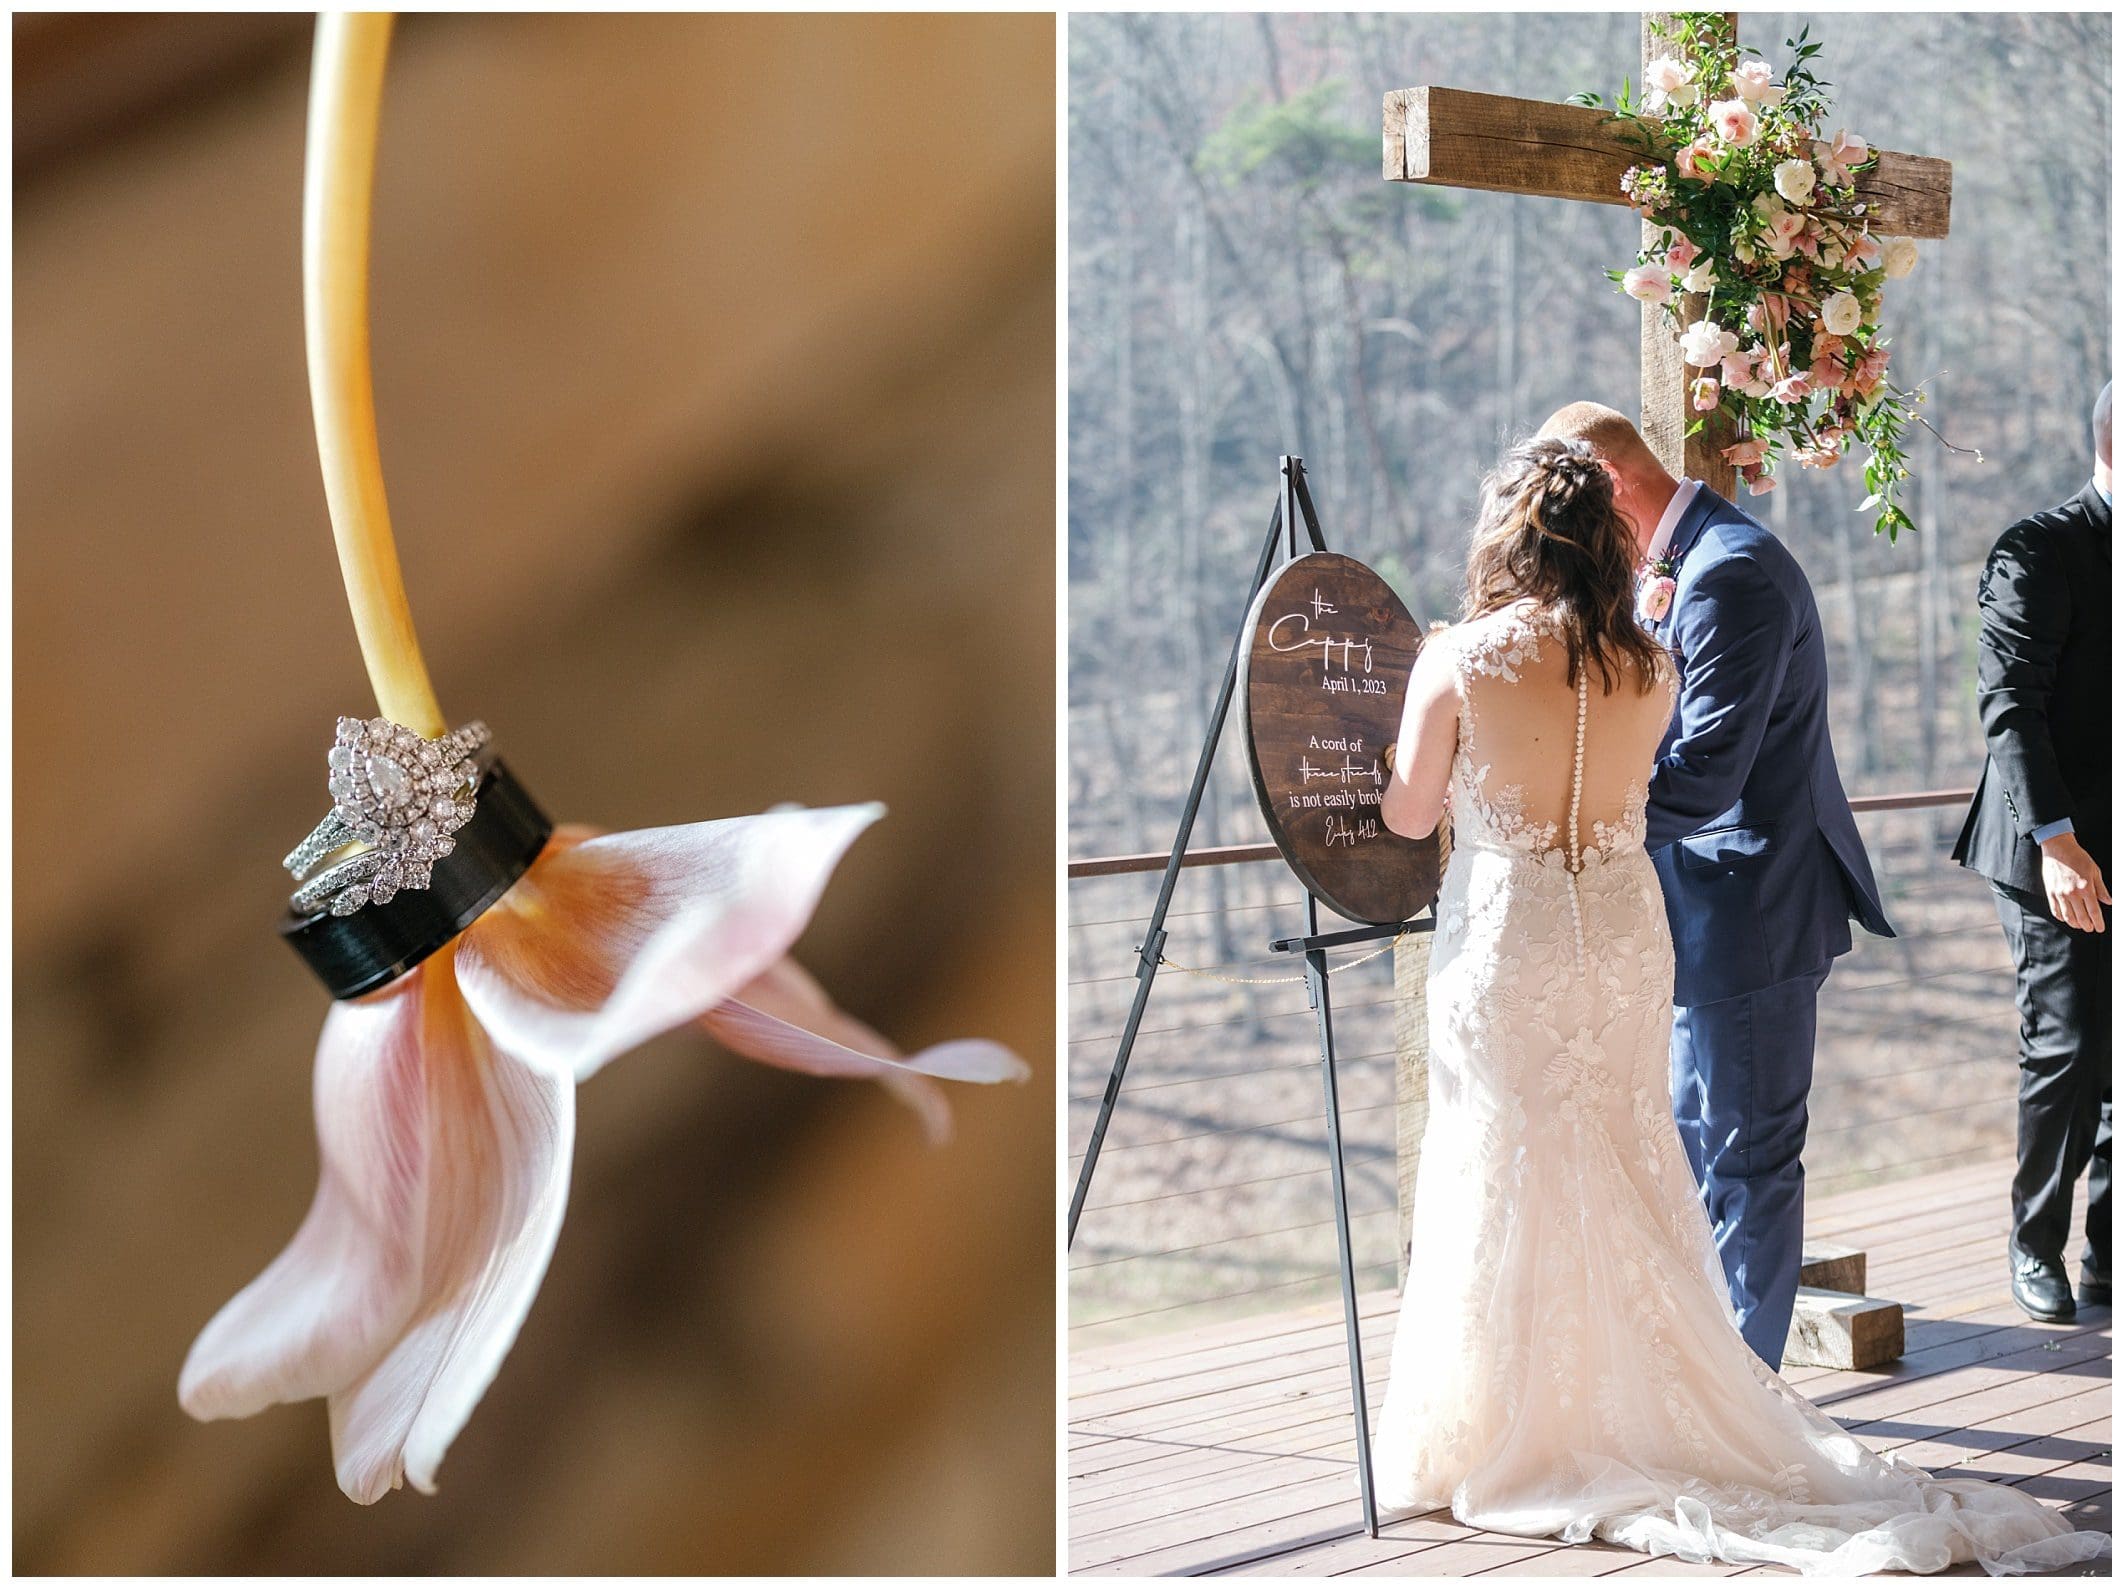 rings on a flower, bride and groom tying cords at ceremony Parker's Mill